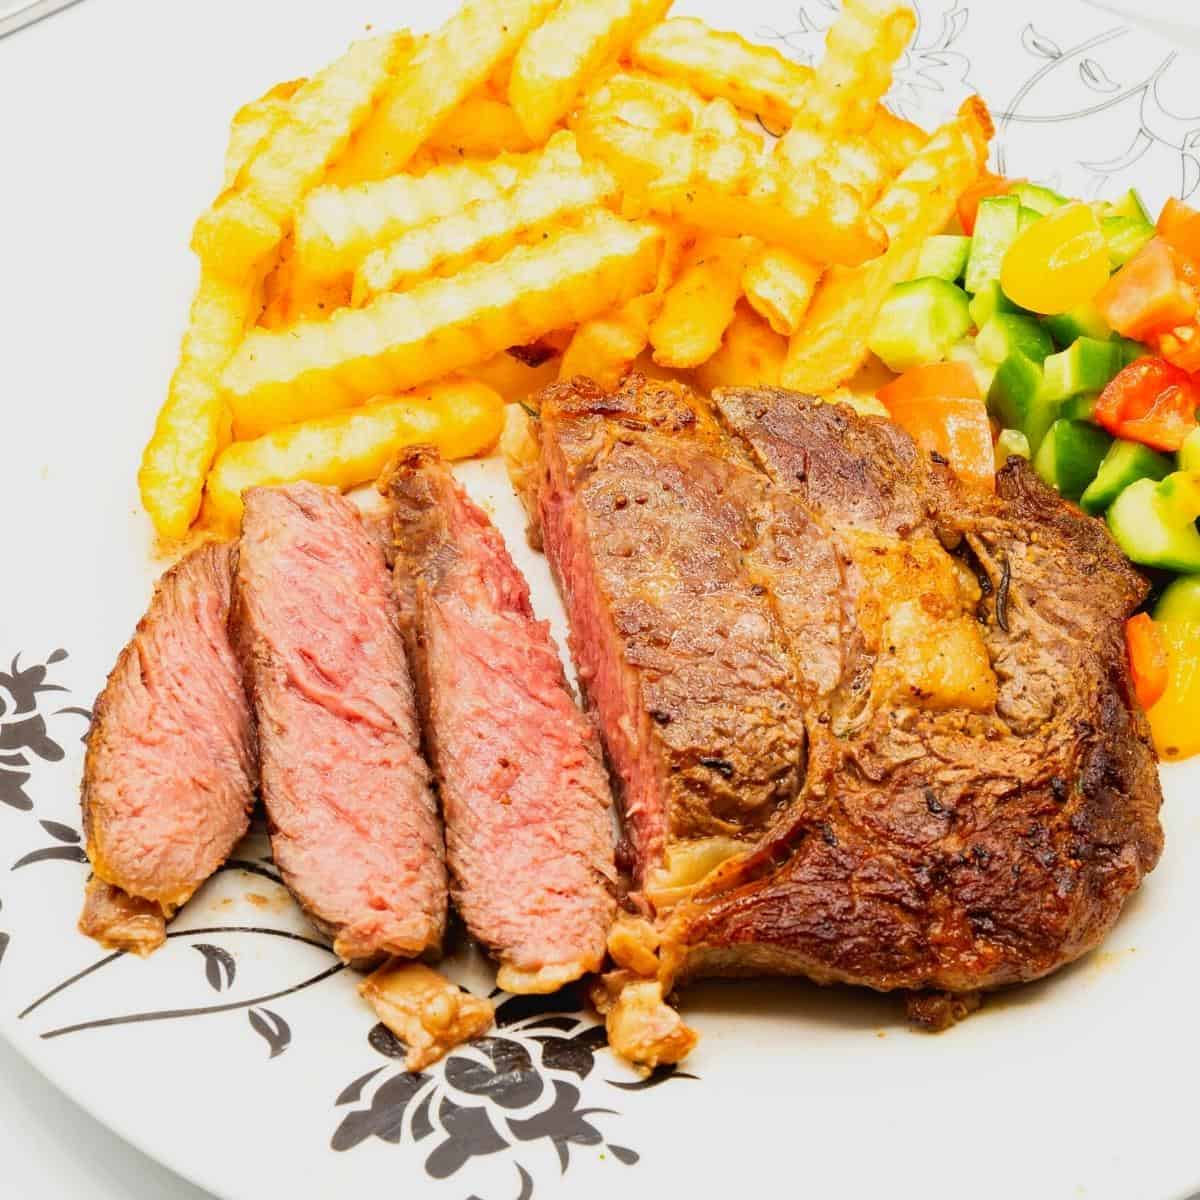 A plate with steak medium rare, fries and salad.